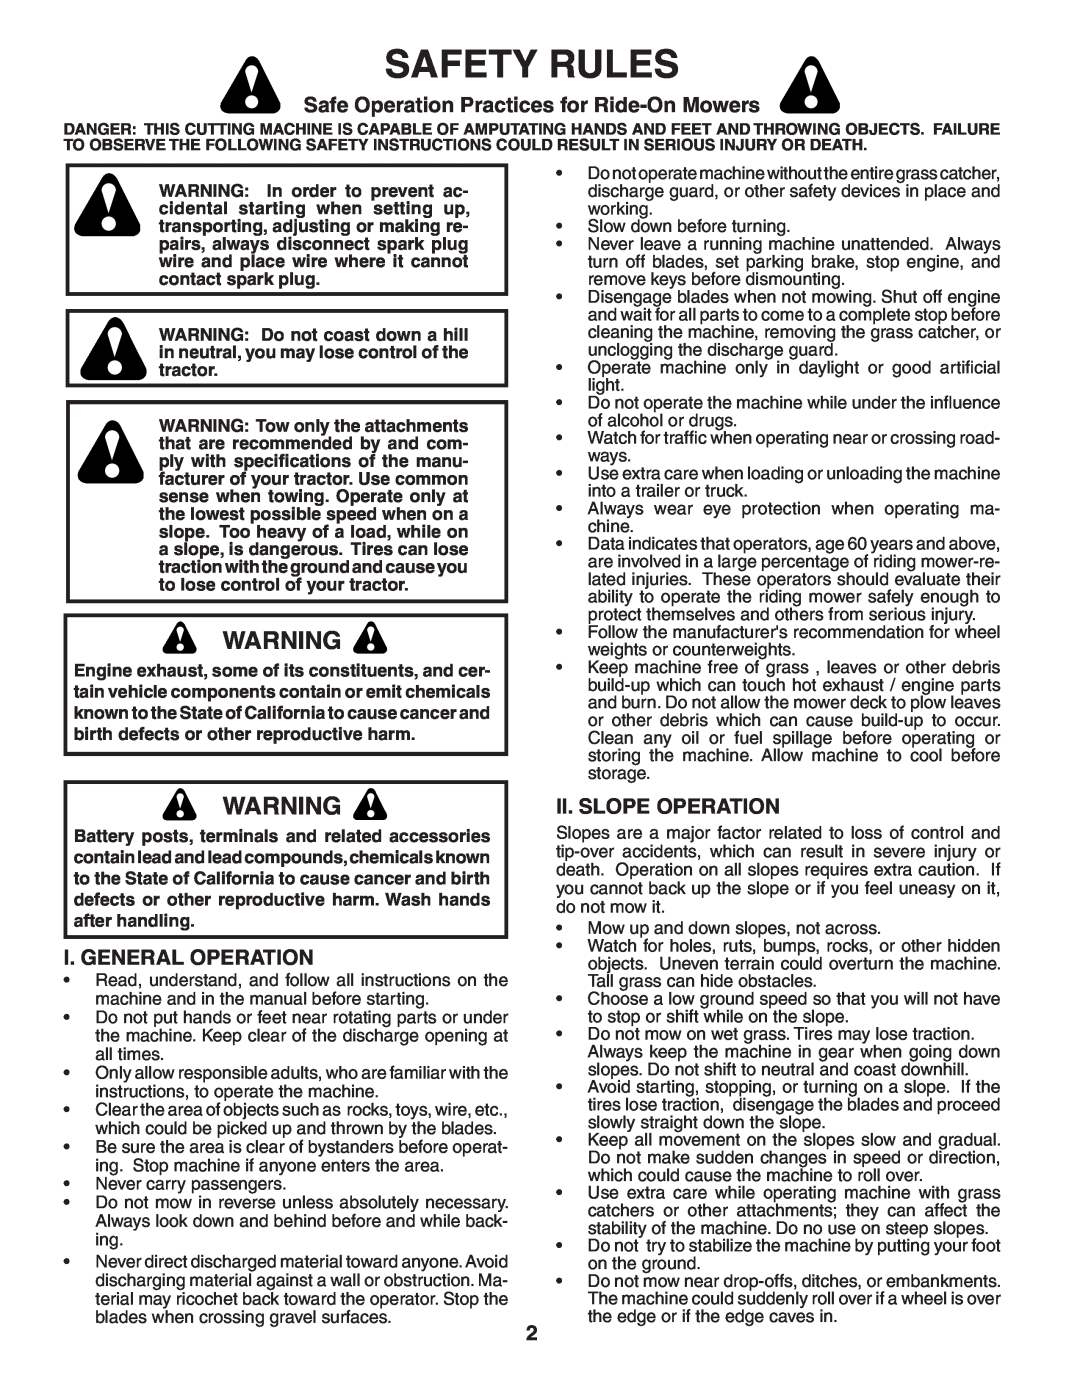 Poulan PB22H54YT Safety Rules, Safe Operation Practices for Ride-On Mowers, I. General Operation, Ii. Slope Operation 